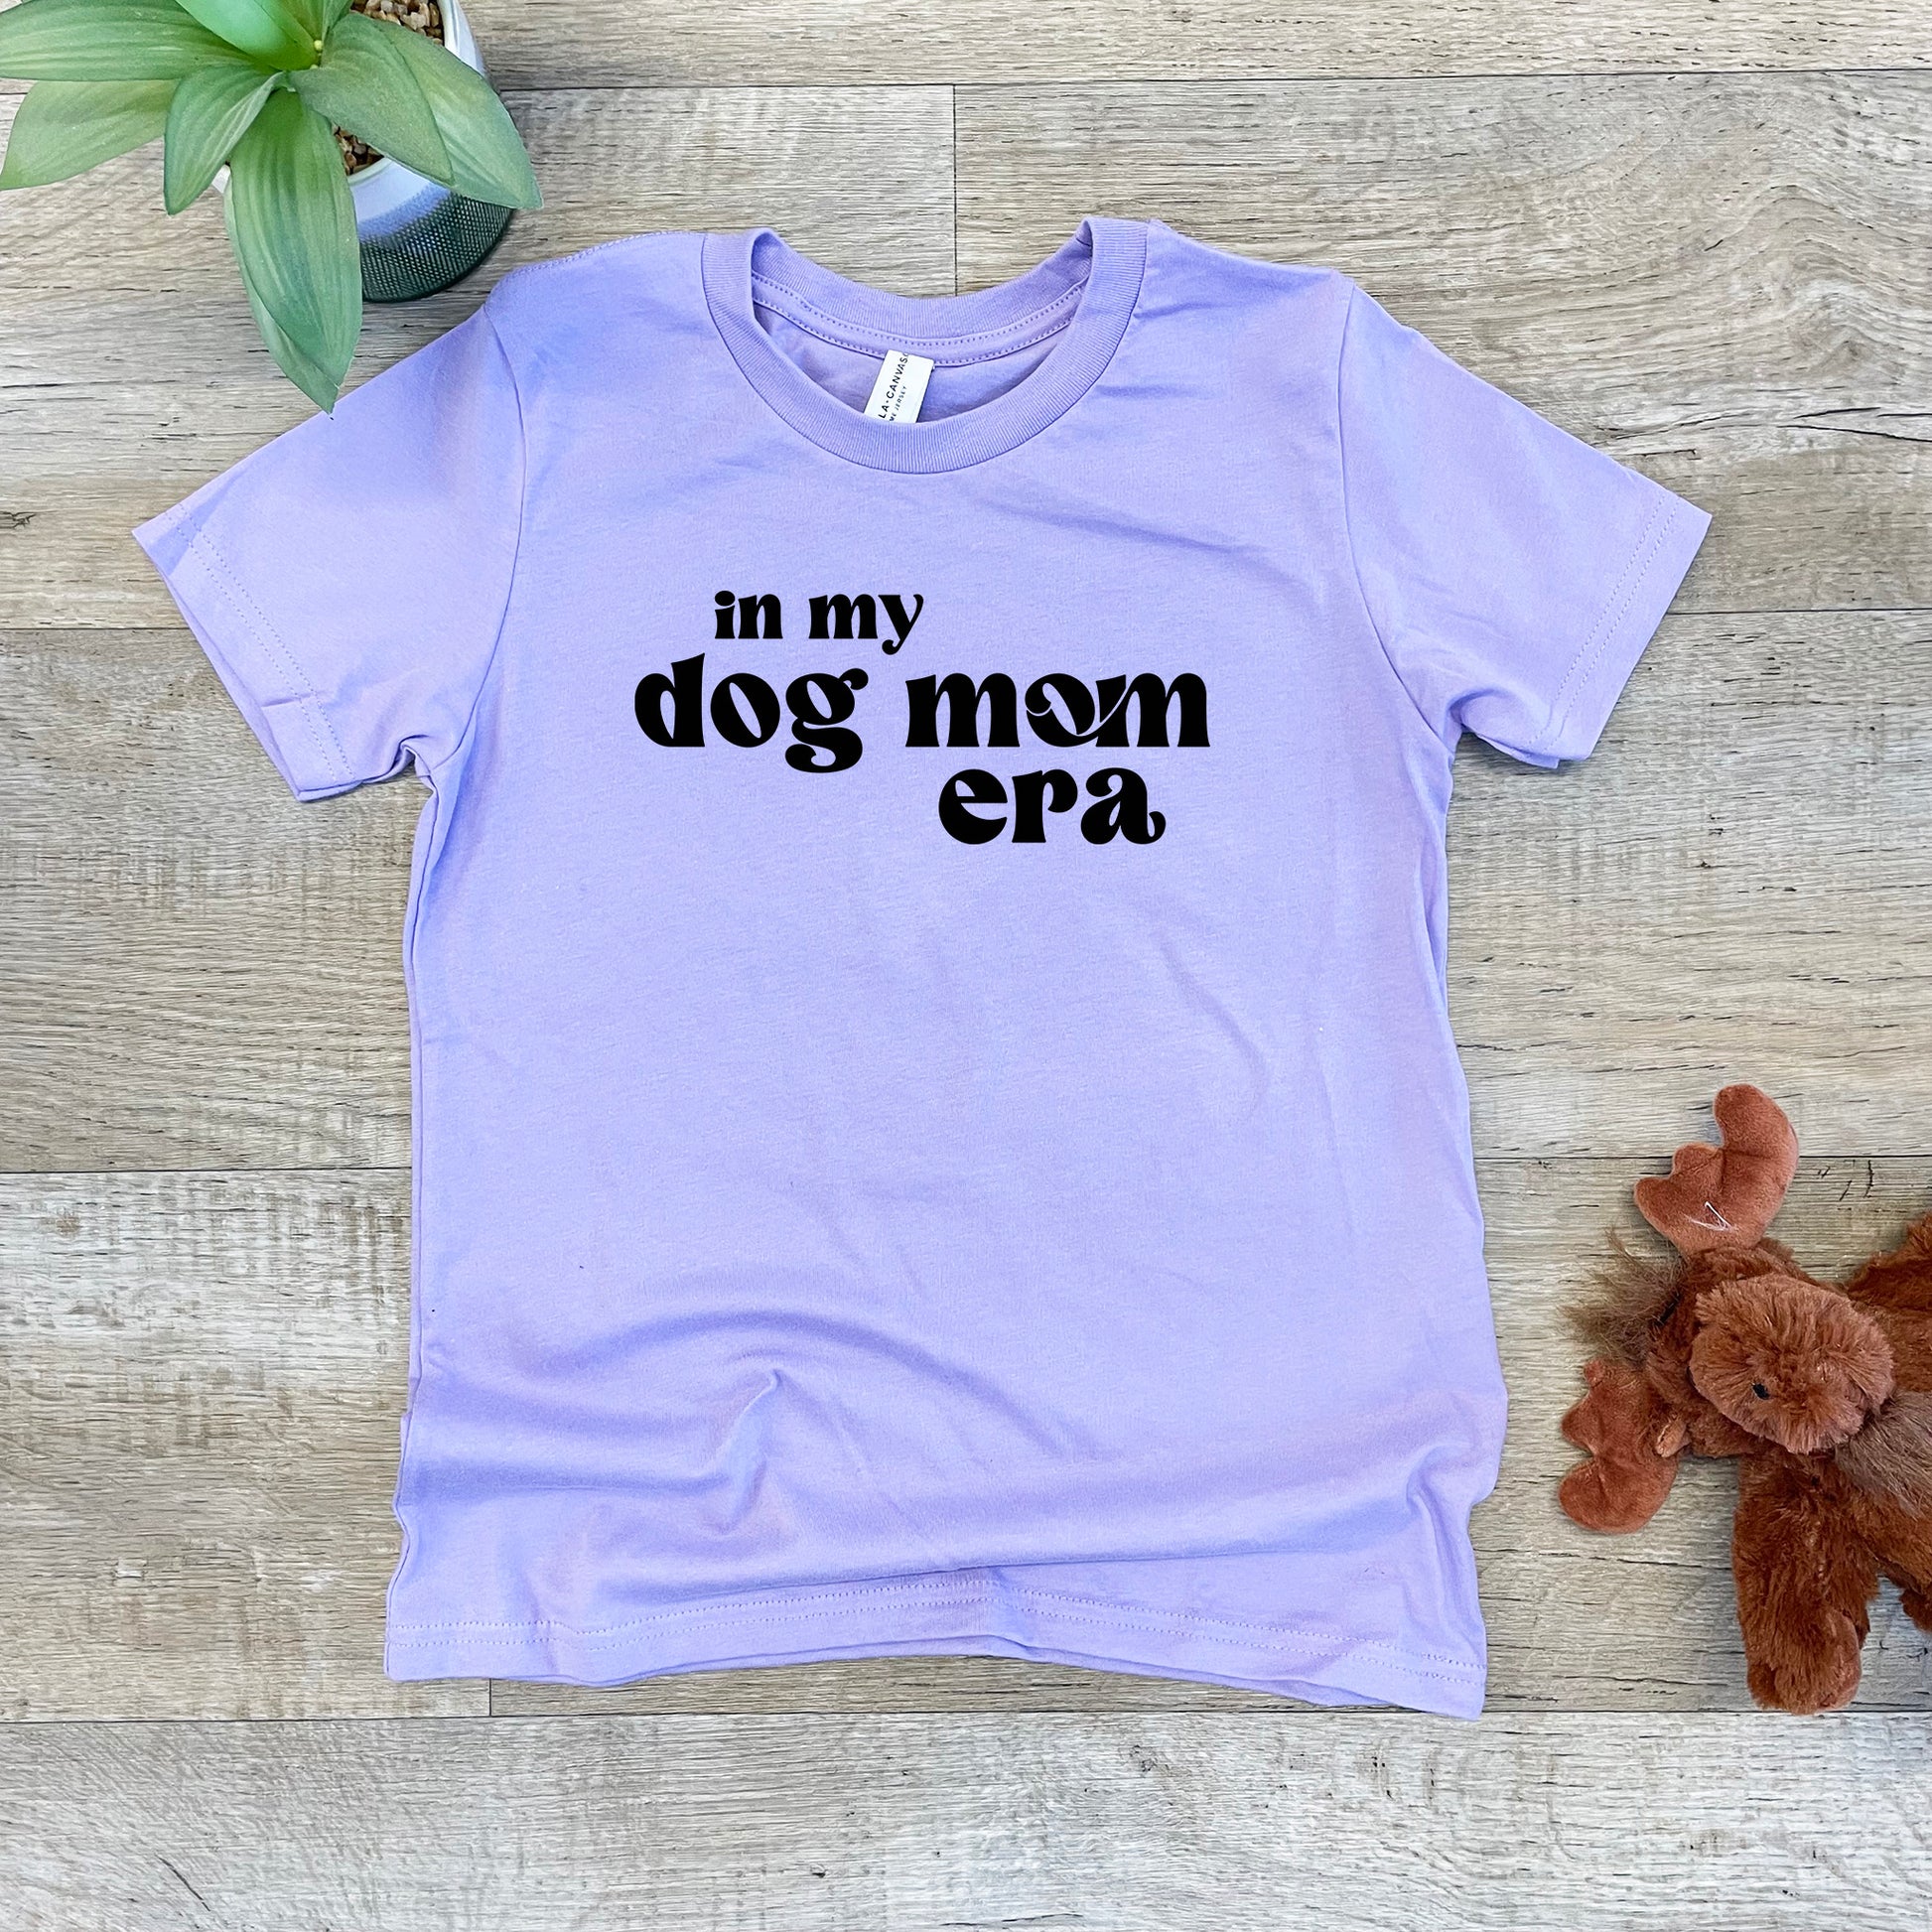 a t - shirt that says in my dog mom era next to a teddy bear